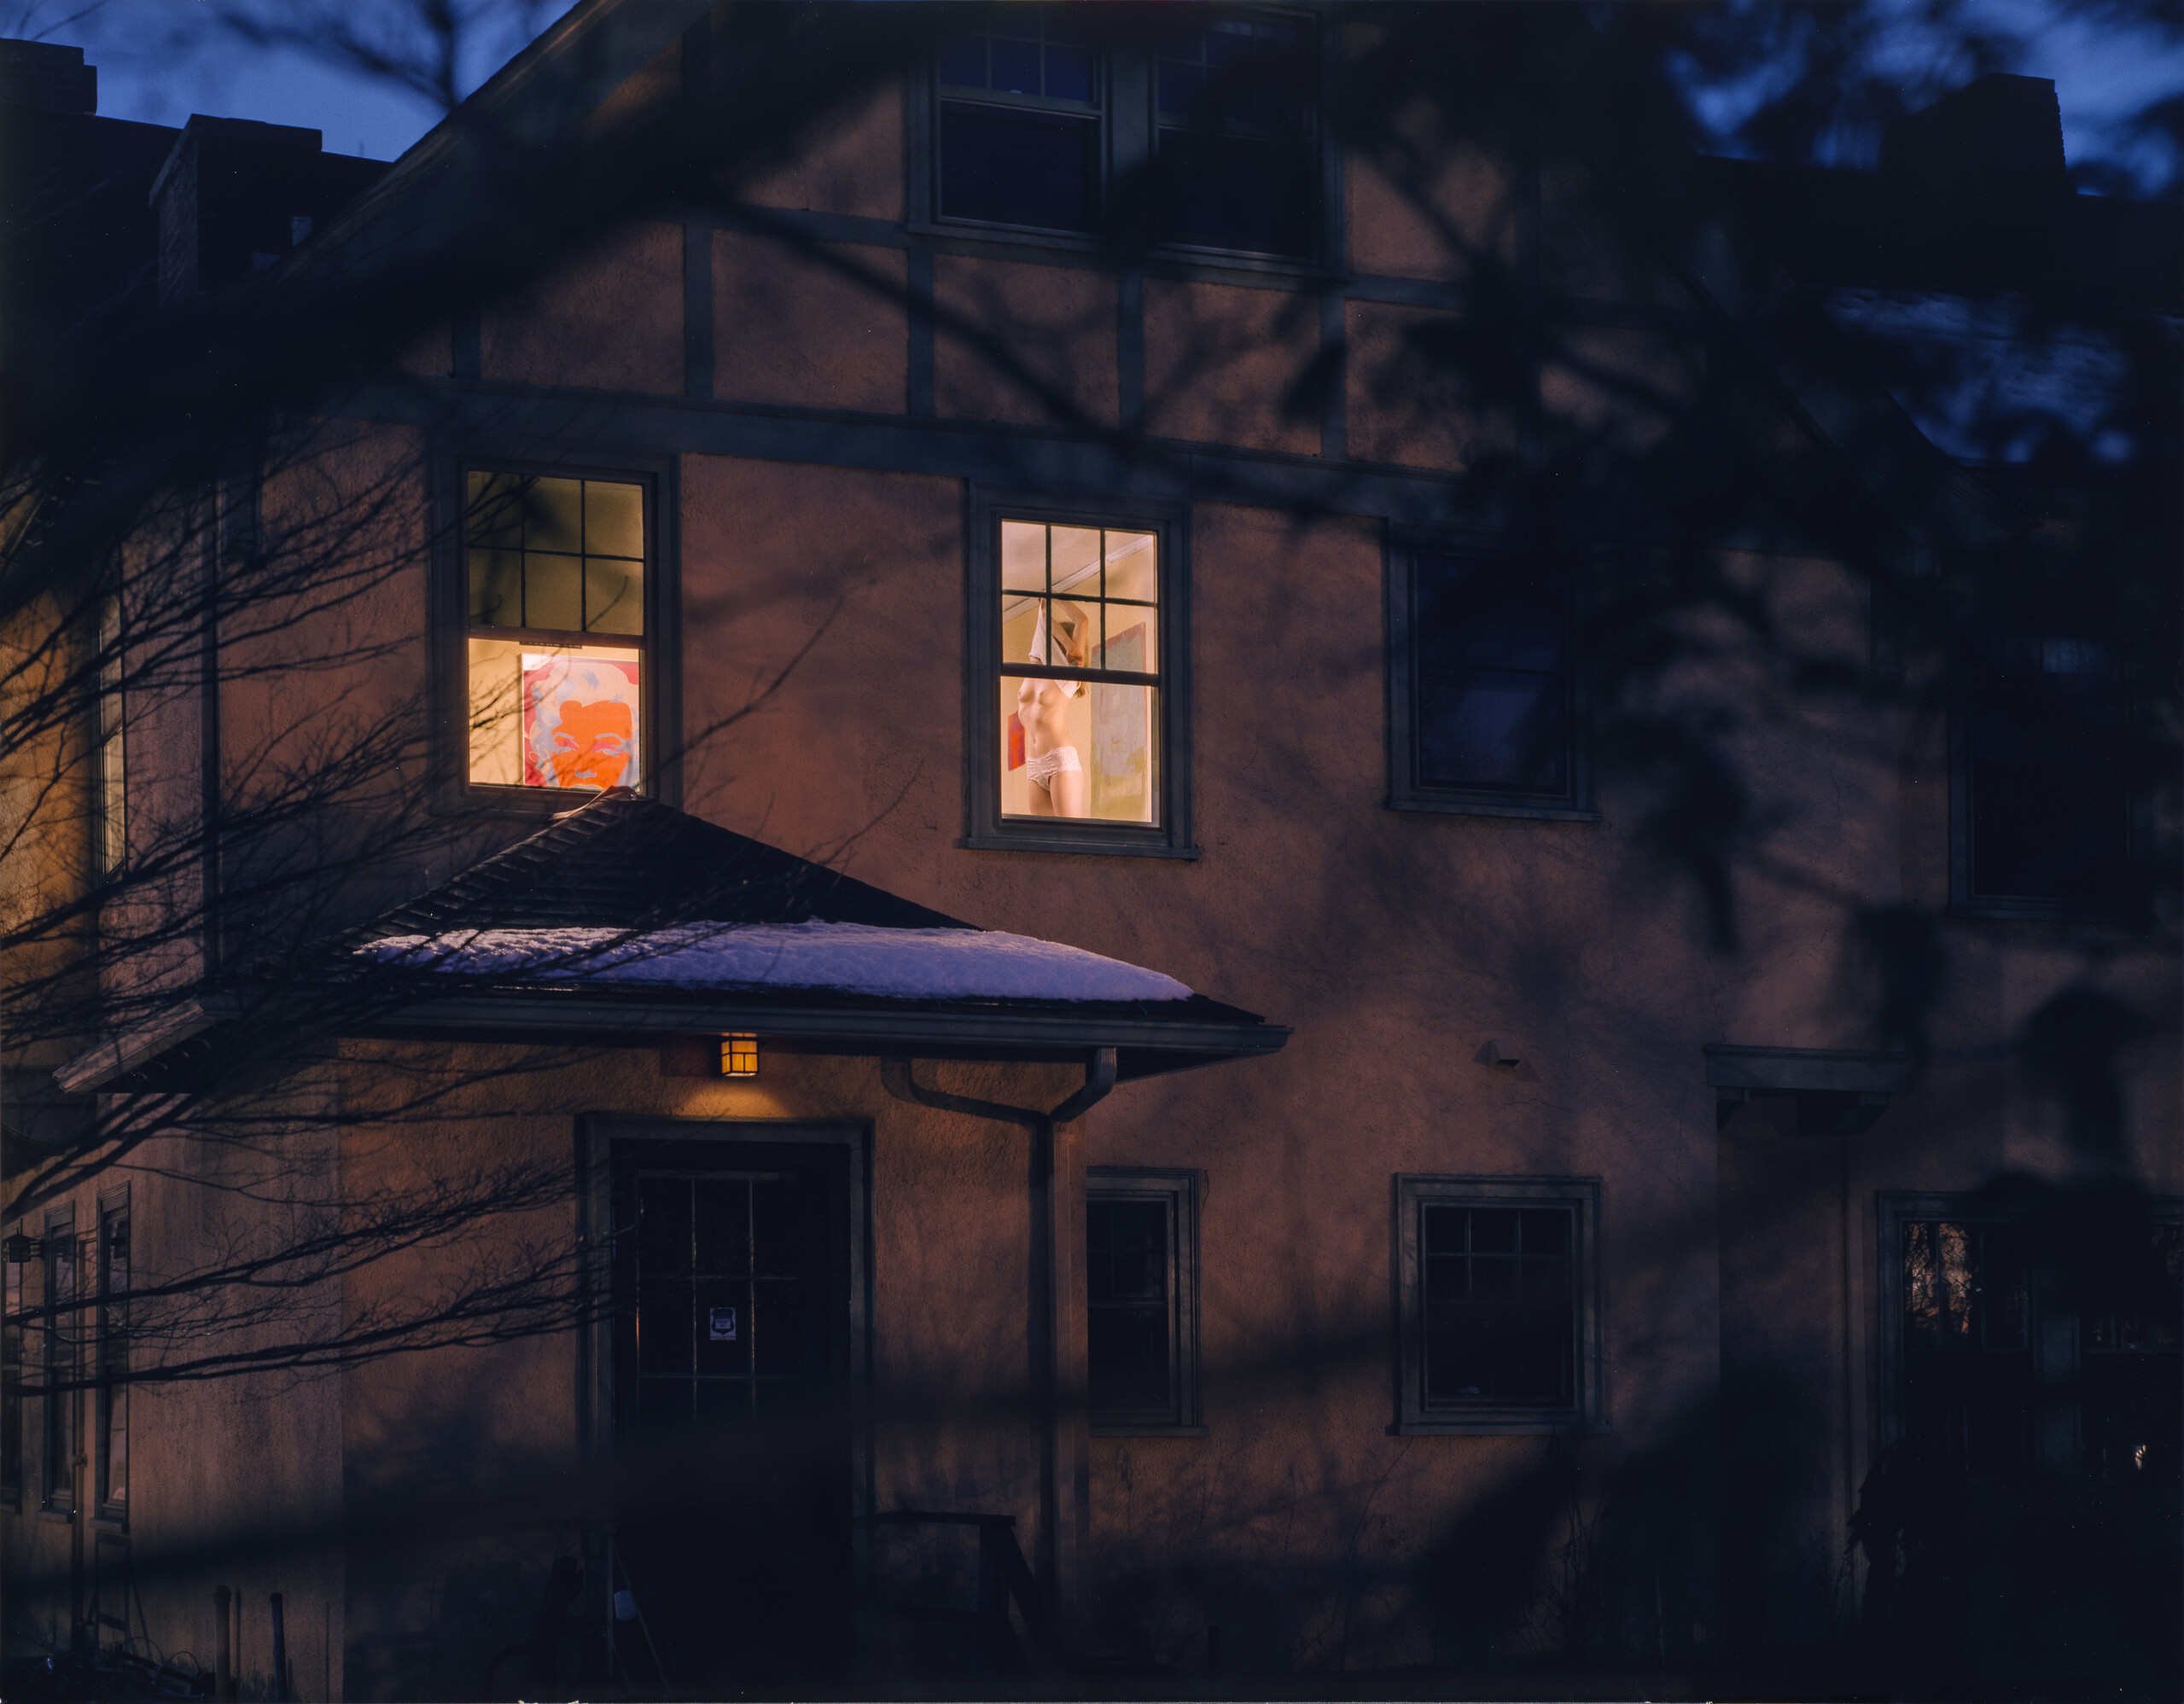 The view of a two-story house at night. The top room of the house has its lights on and you can see through the window the silhouette of a girl pulling a shirt over her head and exposing her torso. In the forefront of the photo, tree branches create shadows and frame the window.